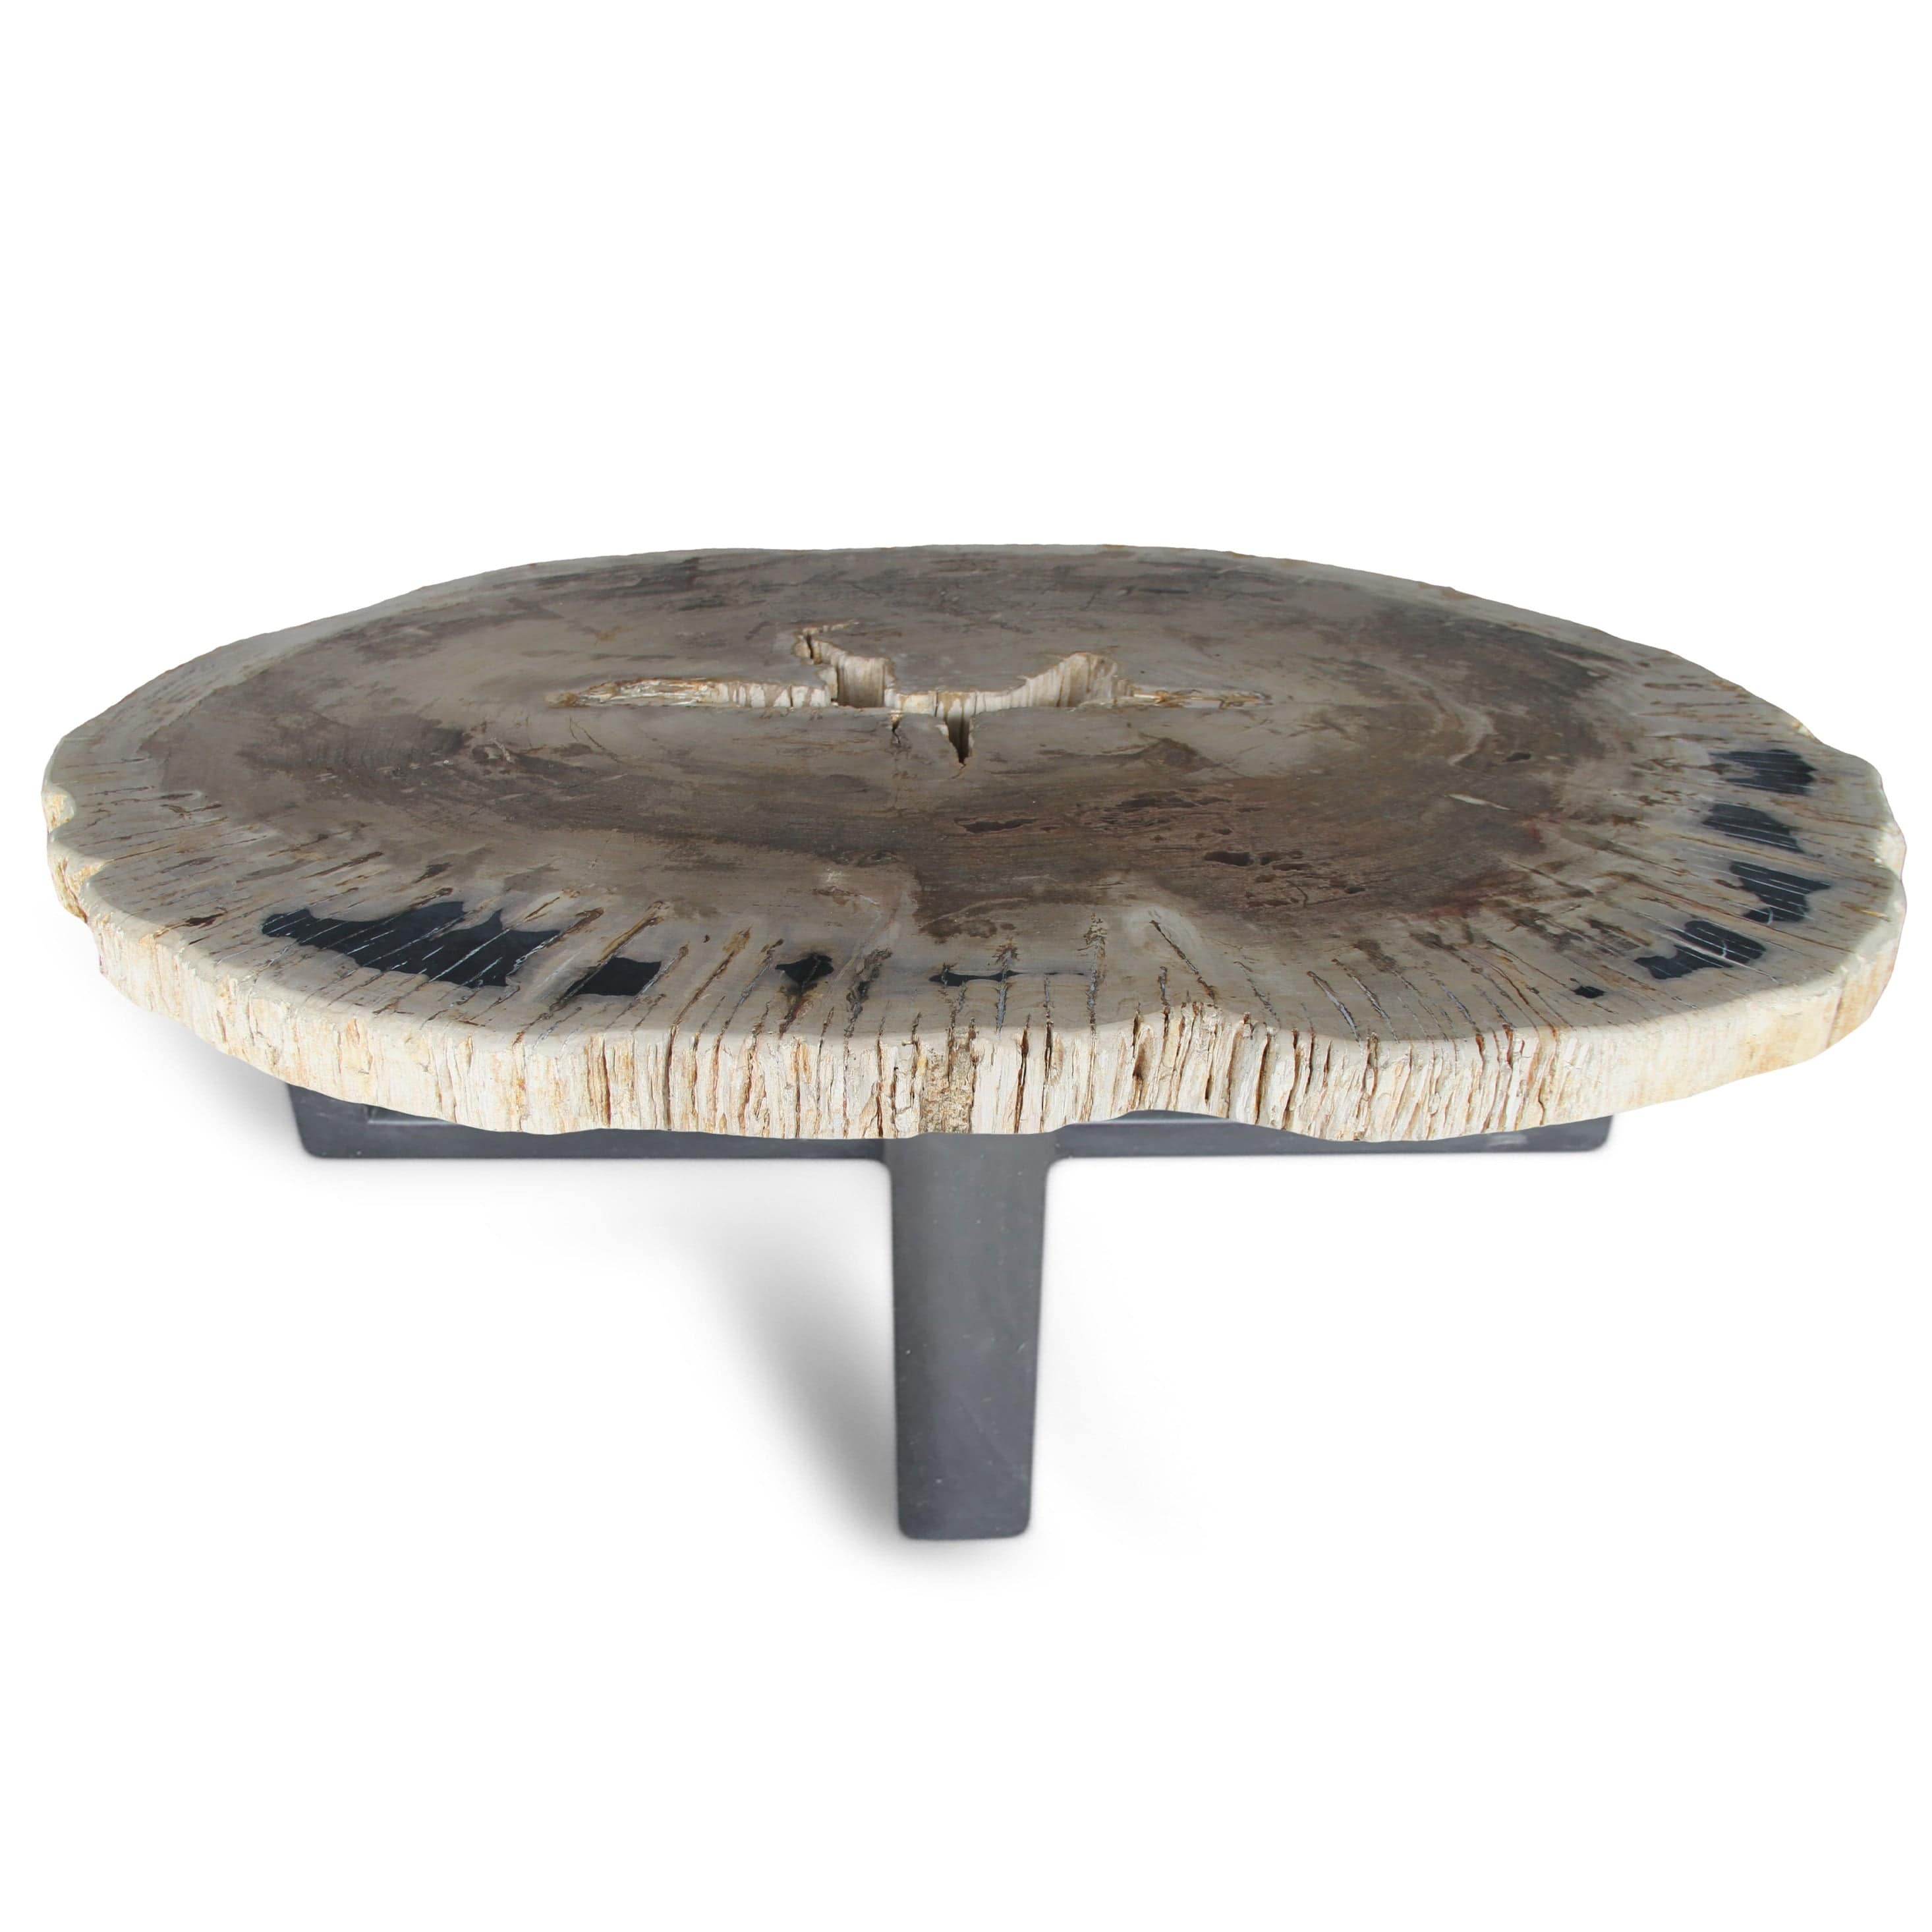 Kalifano Petrified Wood Petrified Wood Round Slab Coffee Table from Indonesia - 51" / 297 lbs PWT10800.006